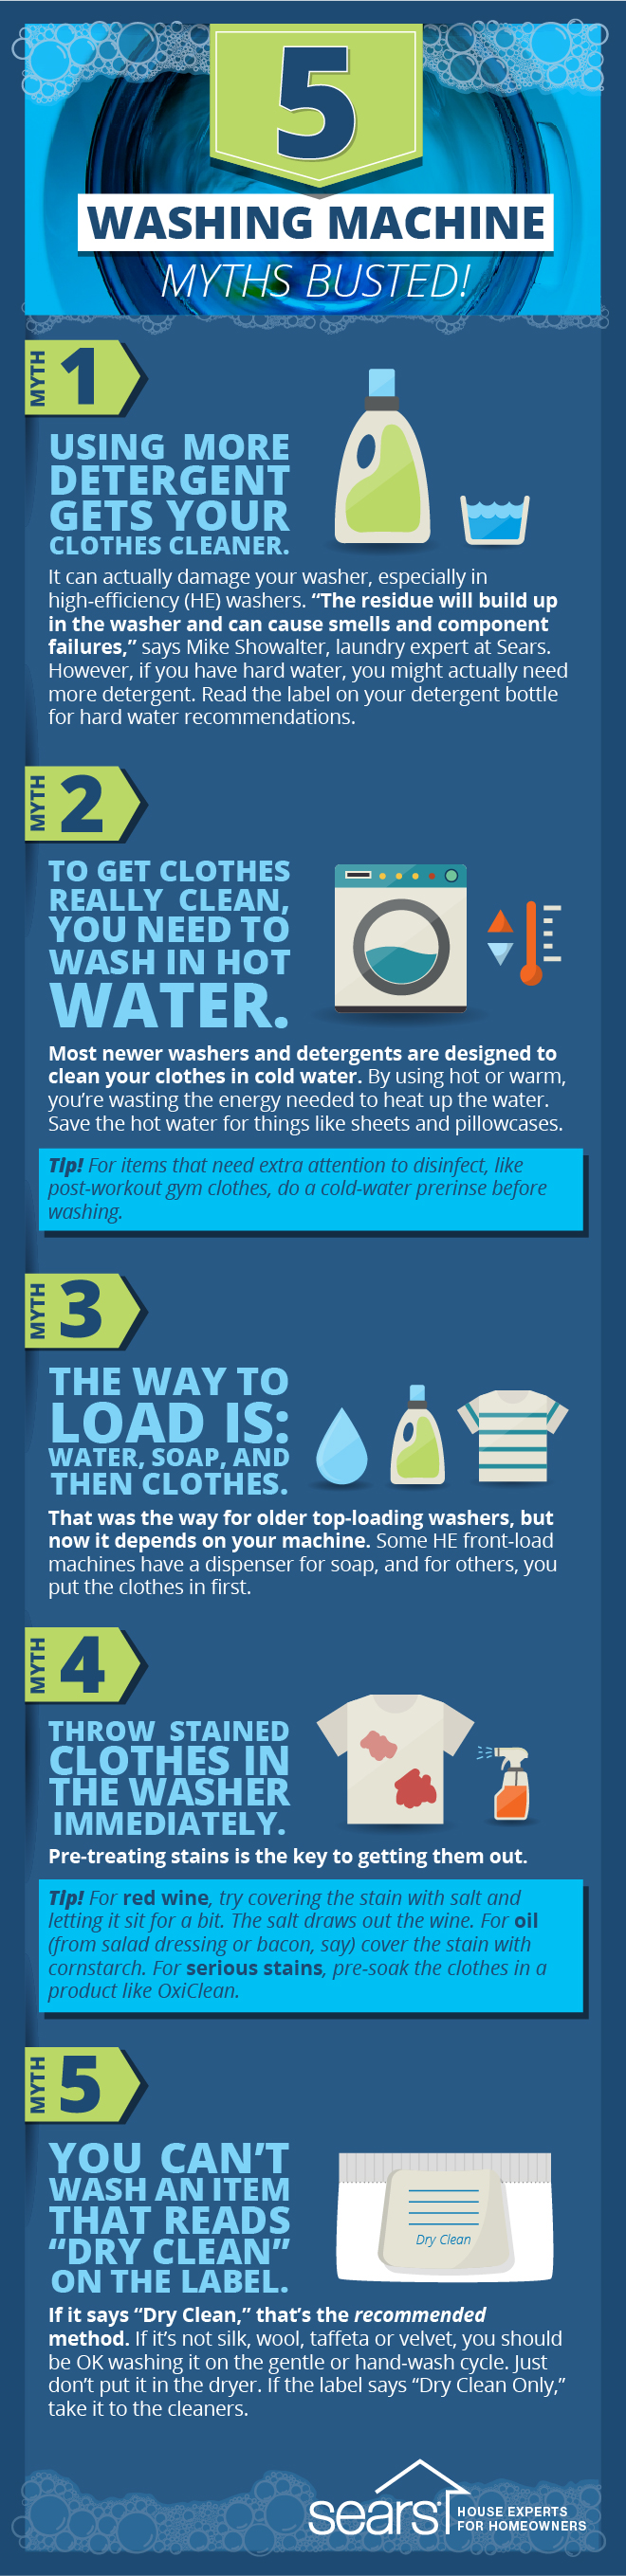 do you wash clothes in warm or cold water